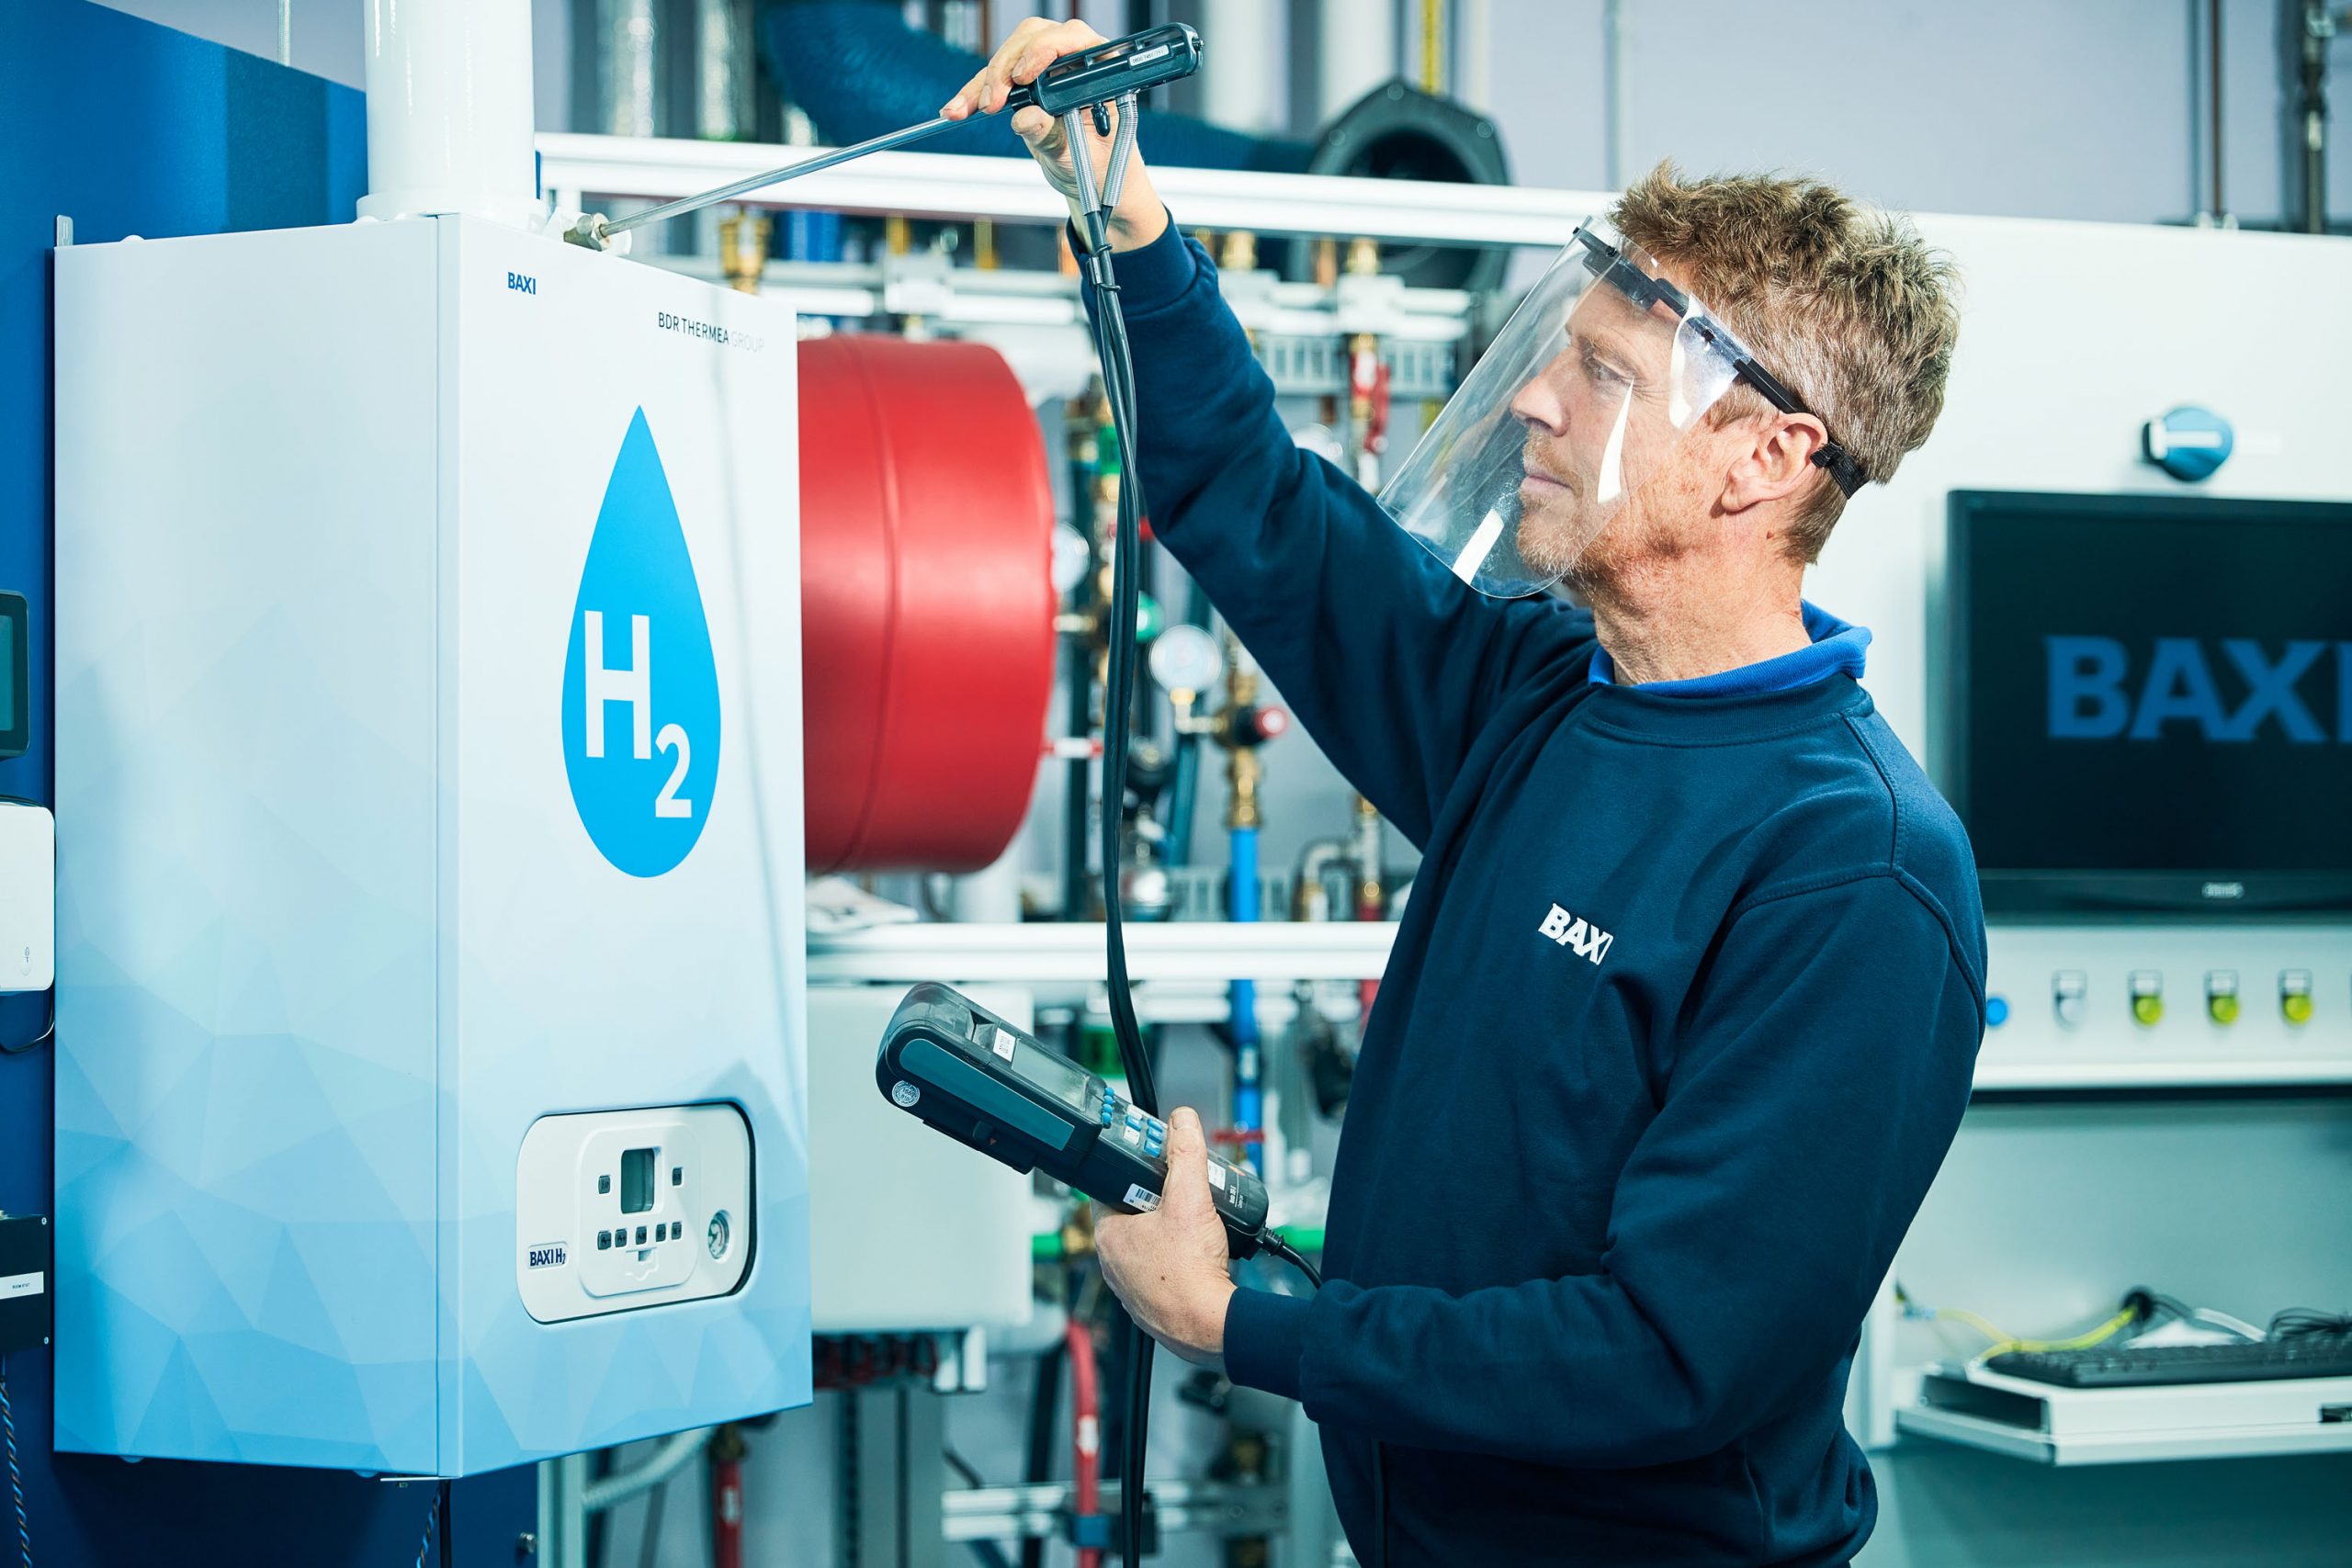 BAXI HEATING COMMITS TO NET ZERO OPERATIONS BY 2030 AND TO MANUFACTURING PRODUCTS THAT ONLY USE LOW CARBON FUELS BY 2025 @baxiboilers